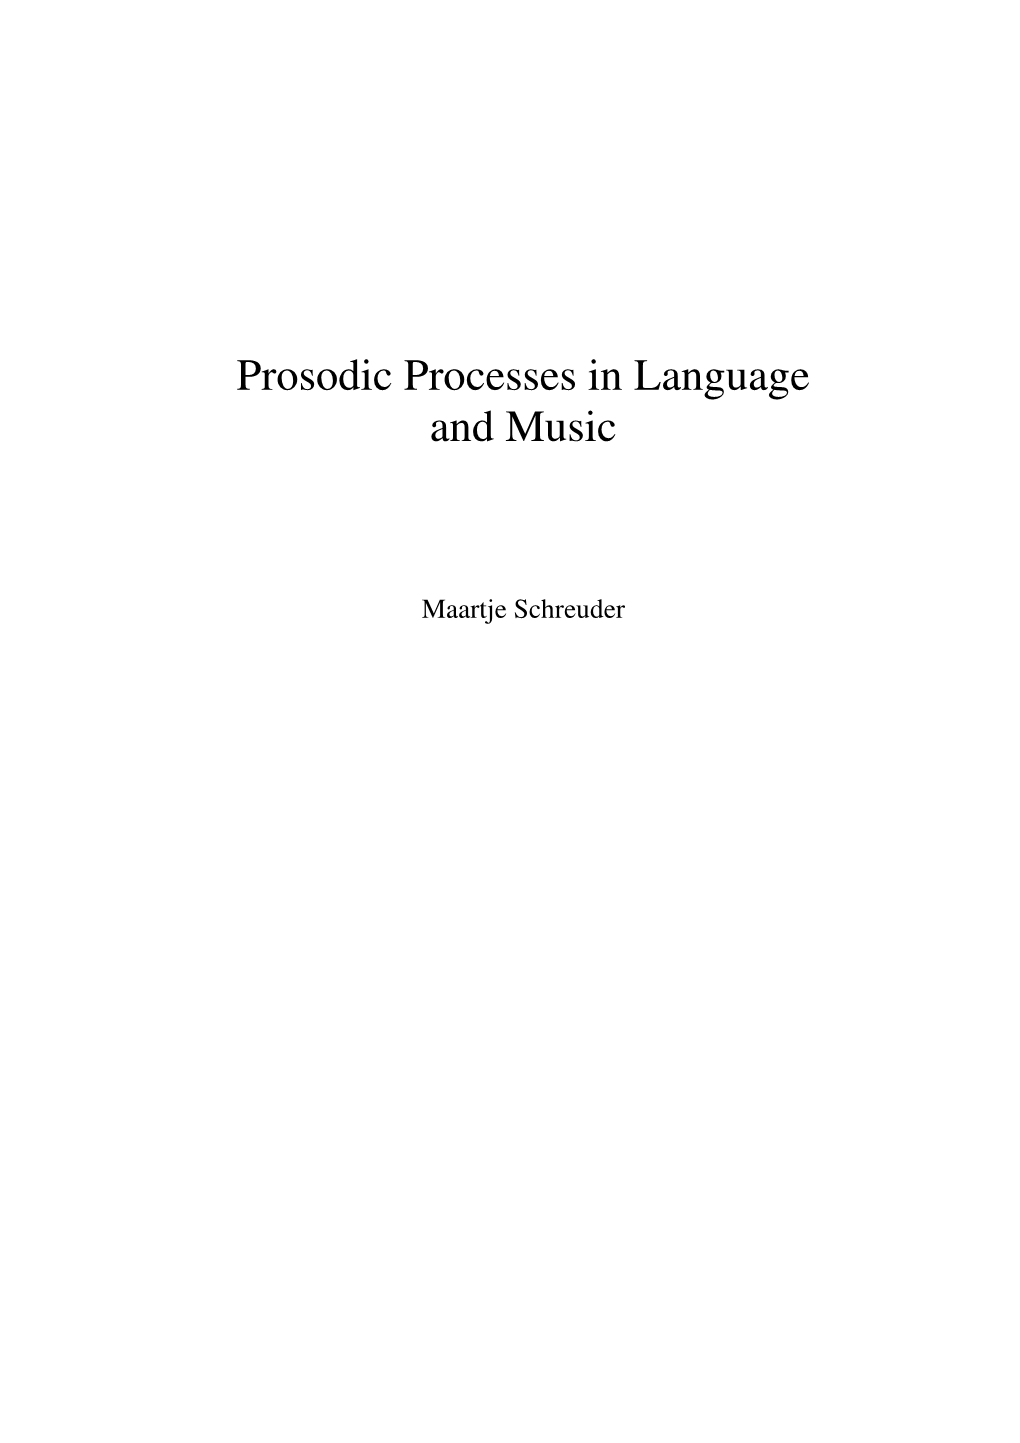 Prosodic Processes in Language and Music